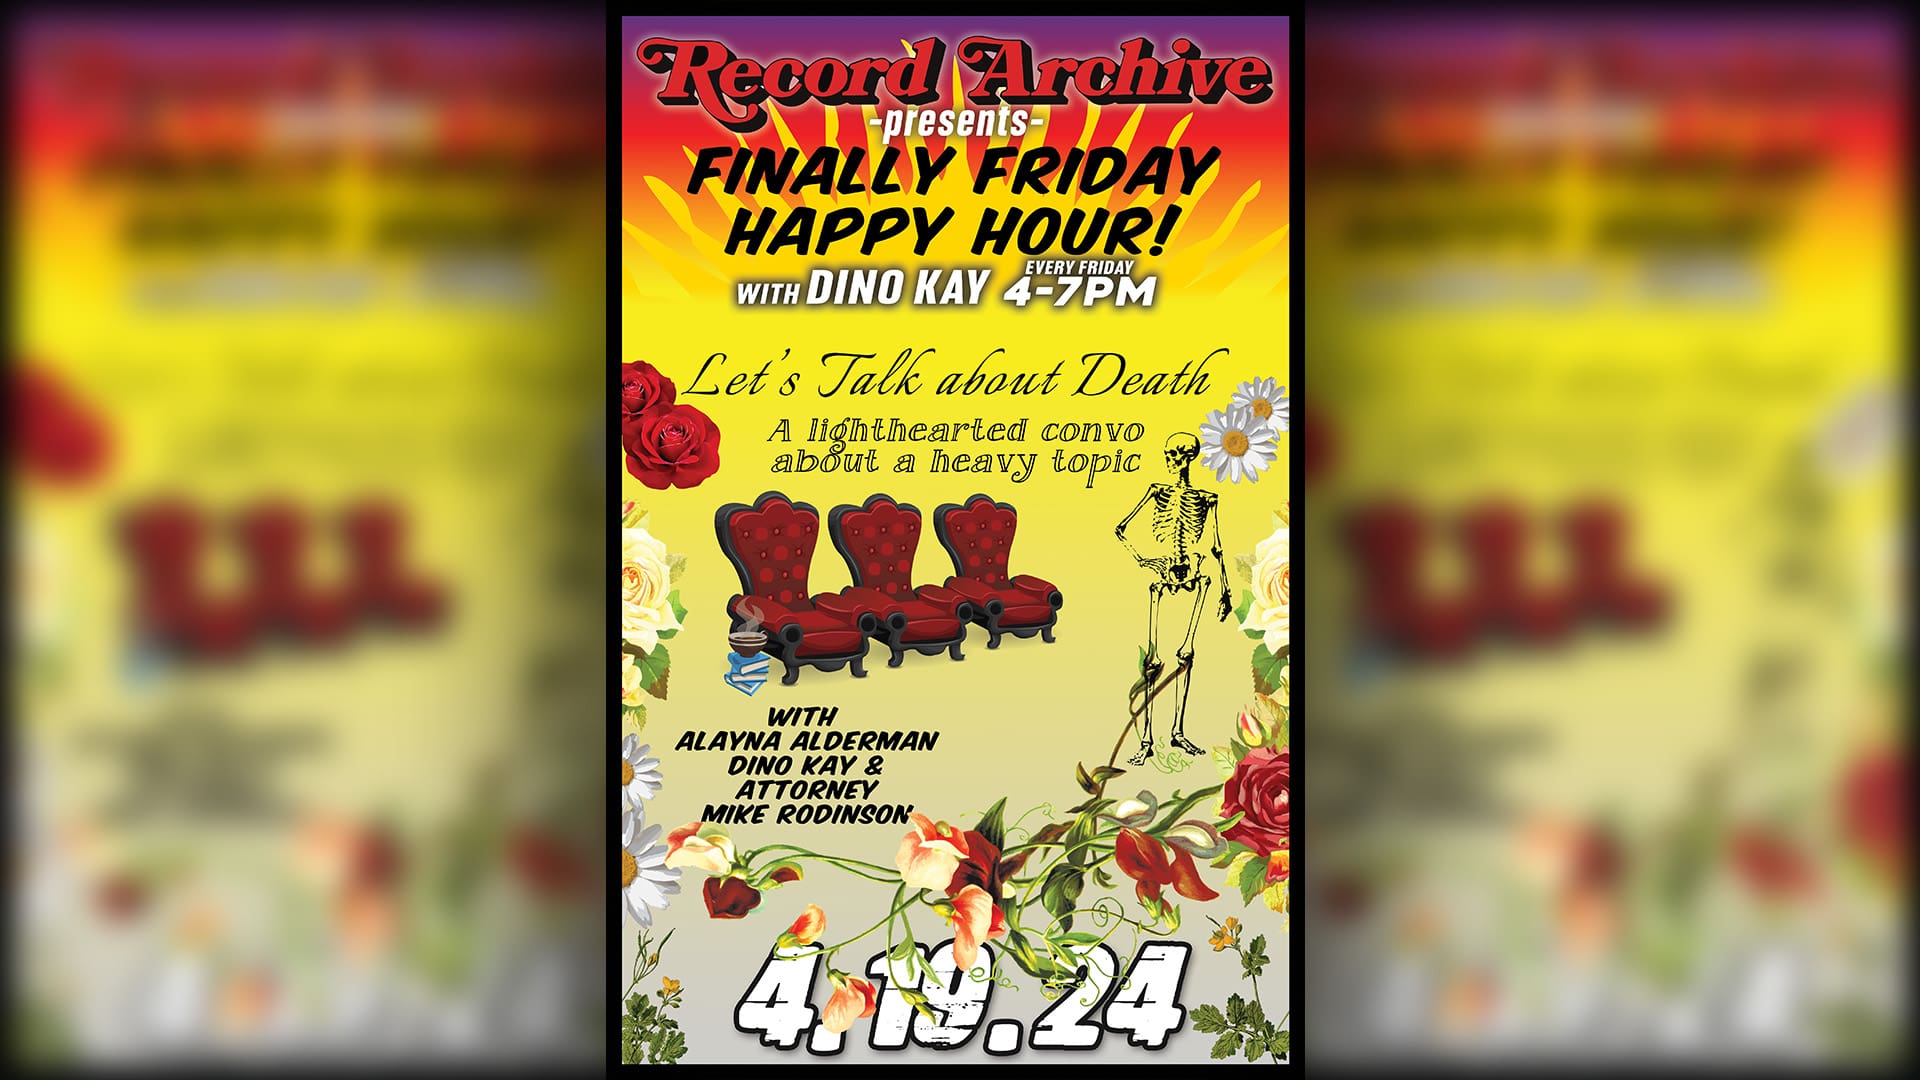 Record Archive presents Finally Friday Happy Hour with Dino Kay every Friday 4-7pm. Let's Talk About Death. A lighthearted convo about a heavy topic. With Alayna Alderman, Dino Kay, and Attorney Mike Rodinson. 4.19.24